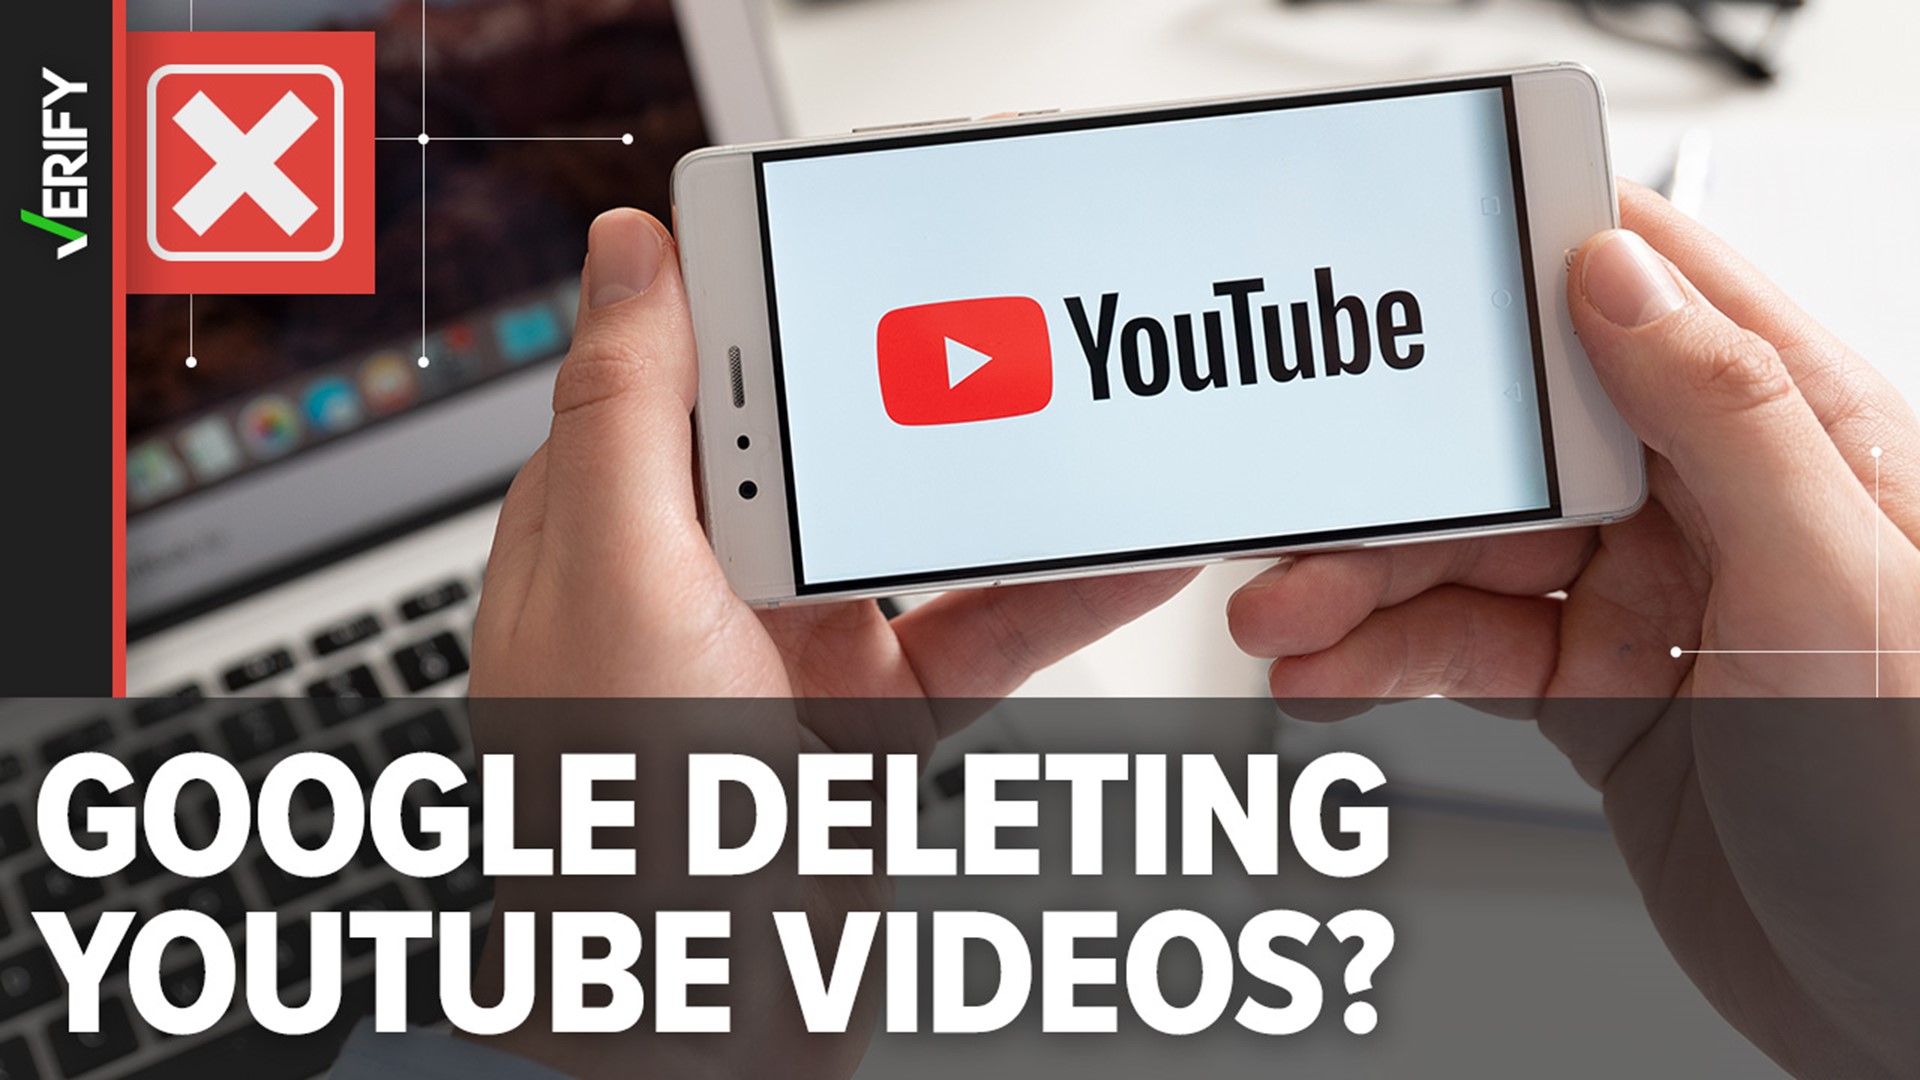 Google announced it would begin deleting accounts that have been inactive for at least two years. But accounts with YouTube videos will not be included.